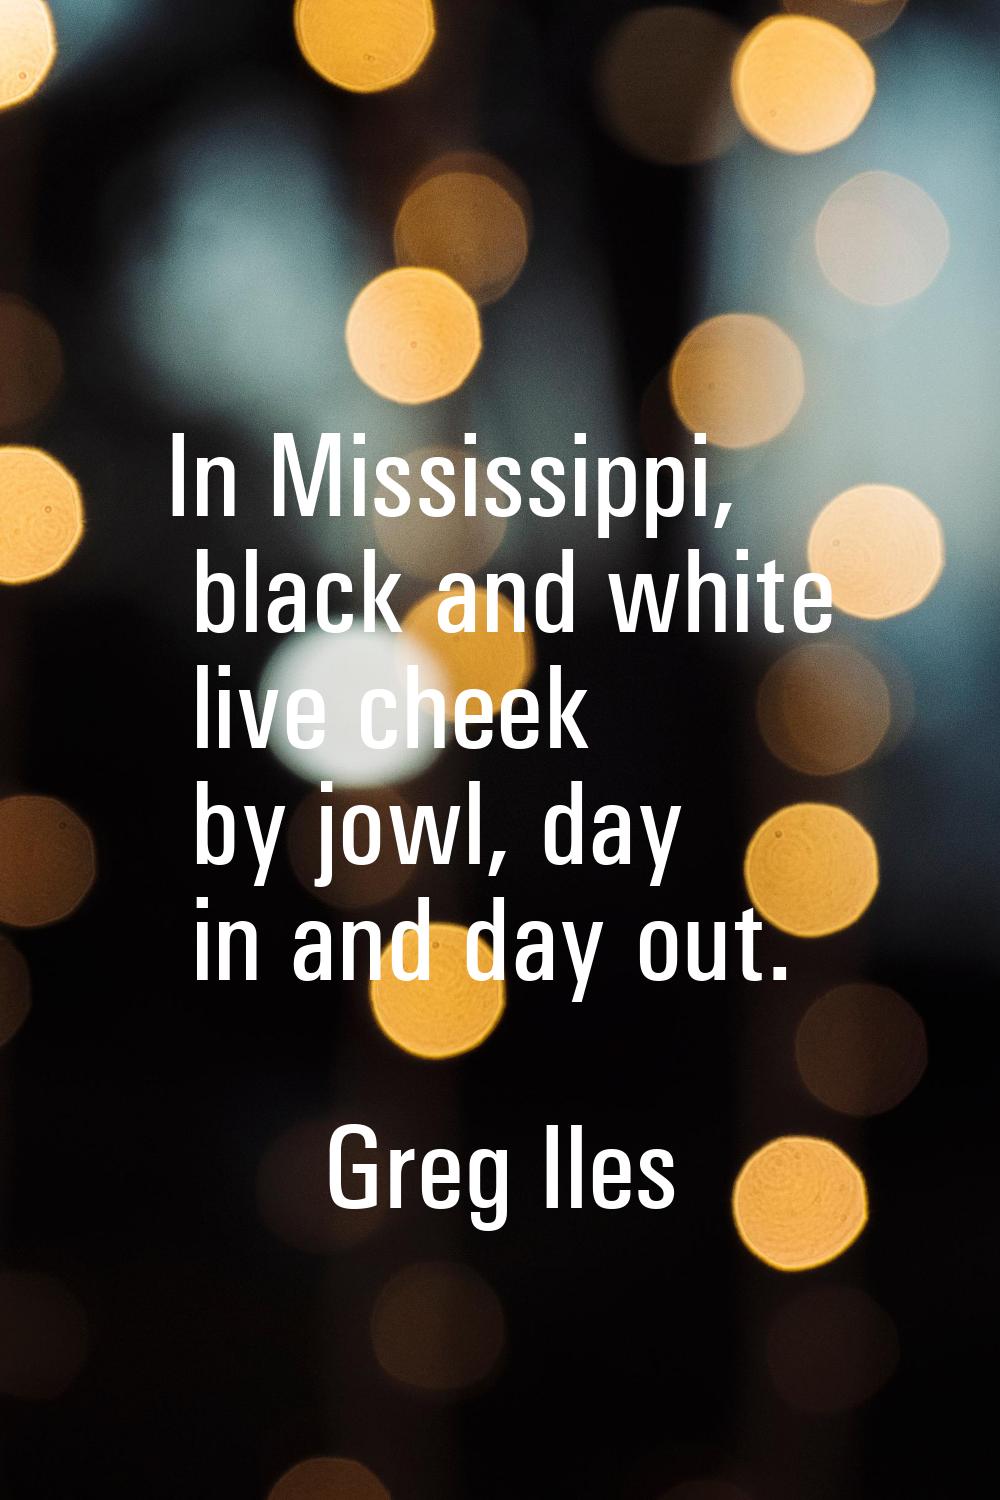 In Mississippi, black and white live cheek by jowl, day in and day out.